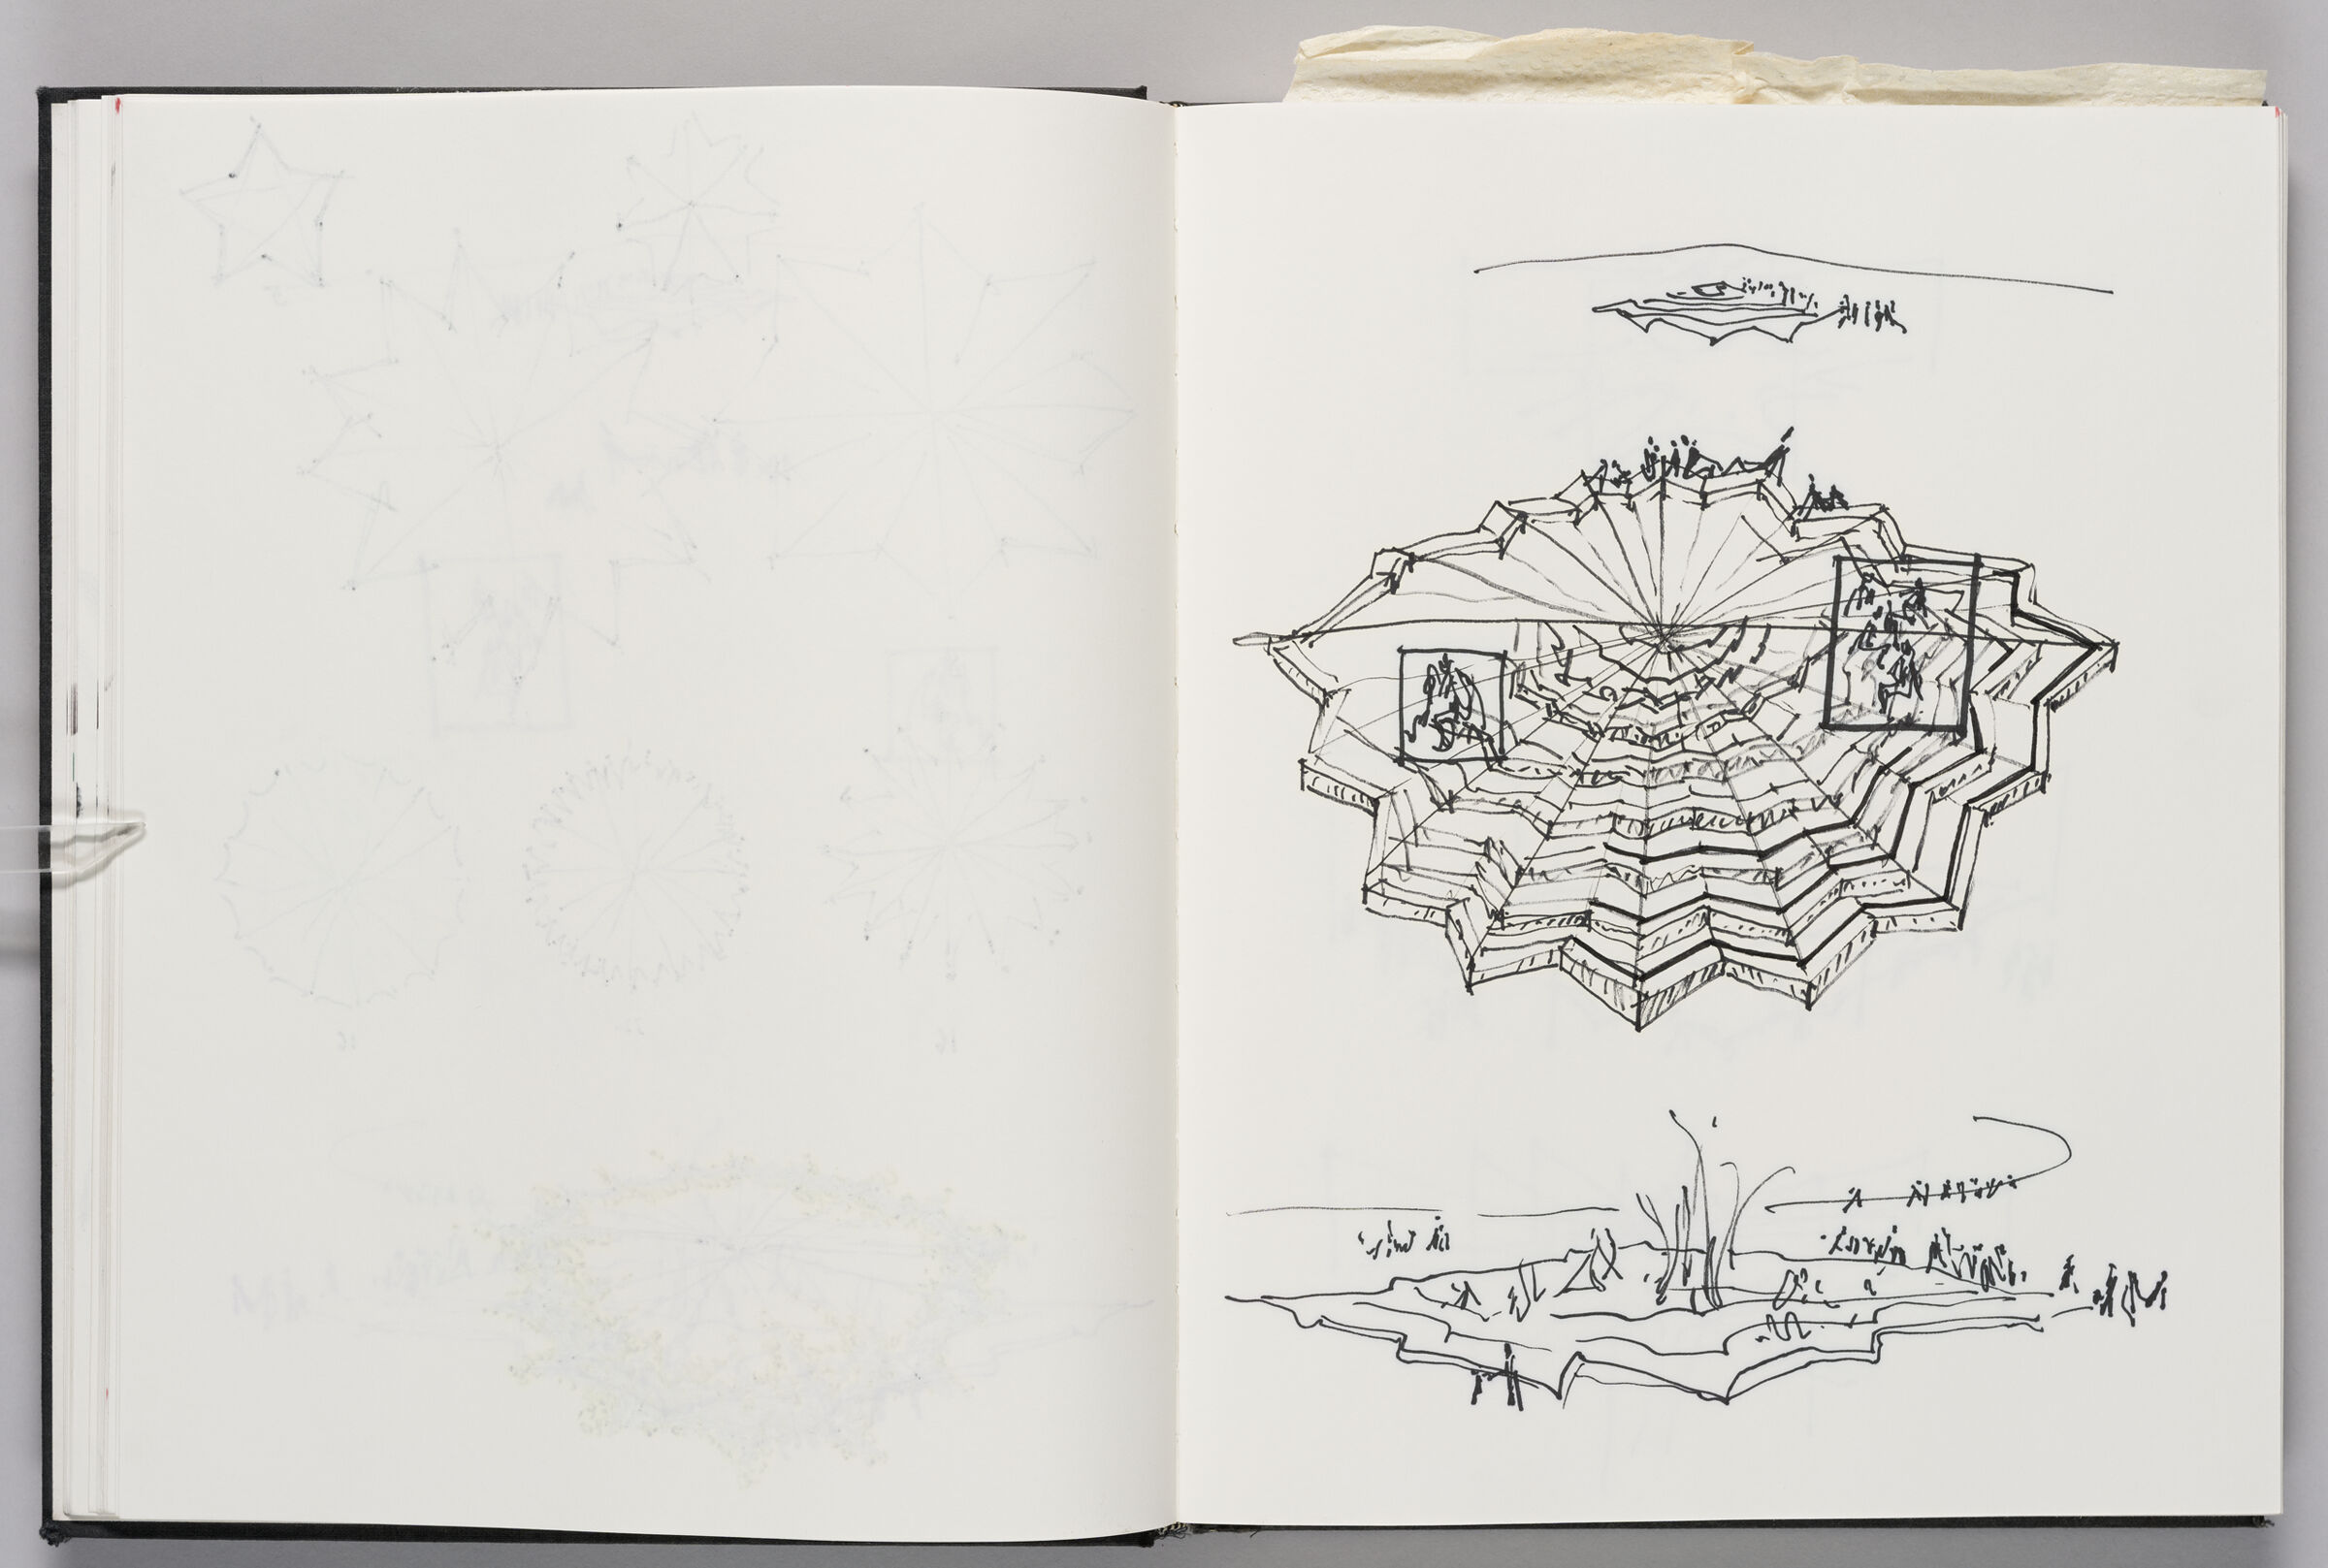 Untitled (Bleed-Through Of Previous Page, Left Page); Untitled (Media Park Fountain Design, Right Page)